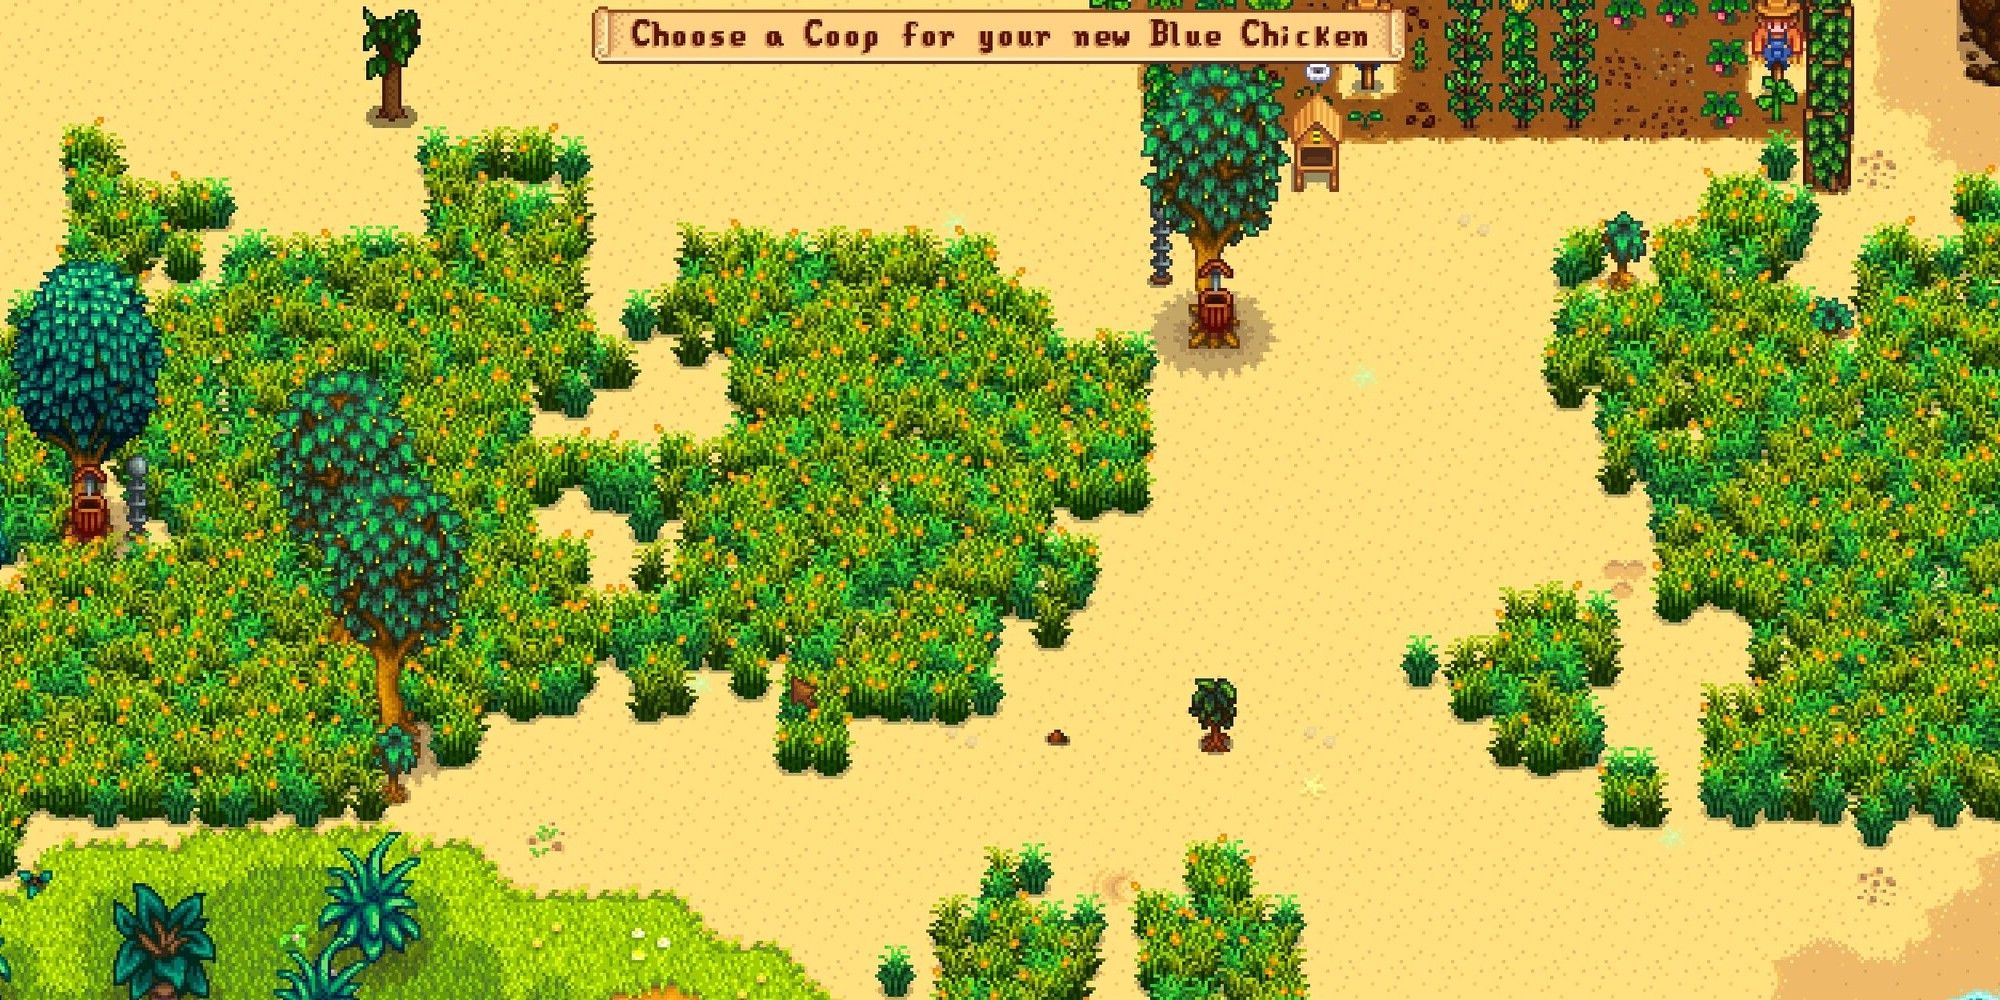 farm view with text prompting player to choose a coop for their blue chicken